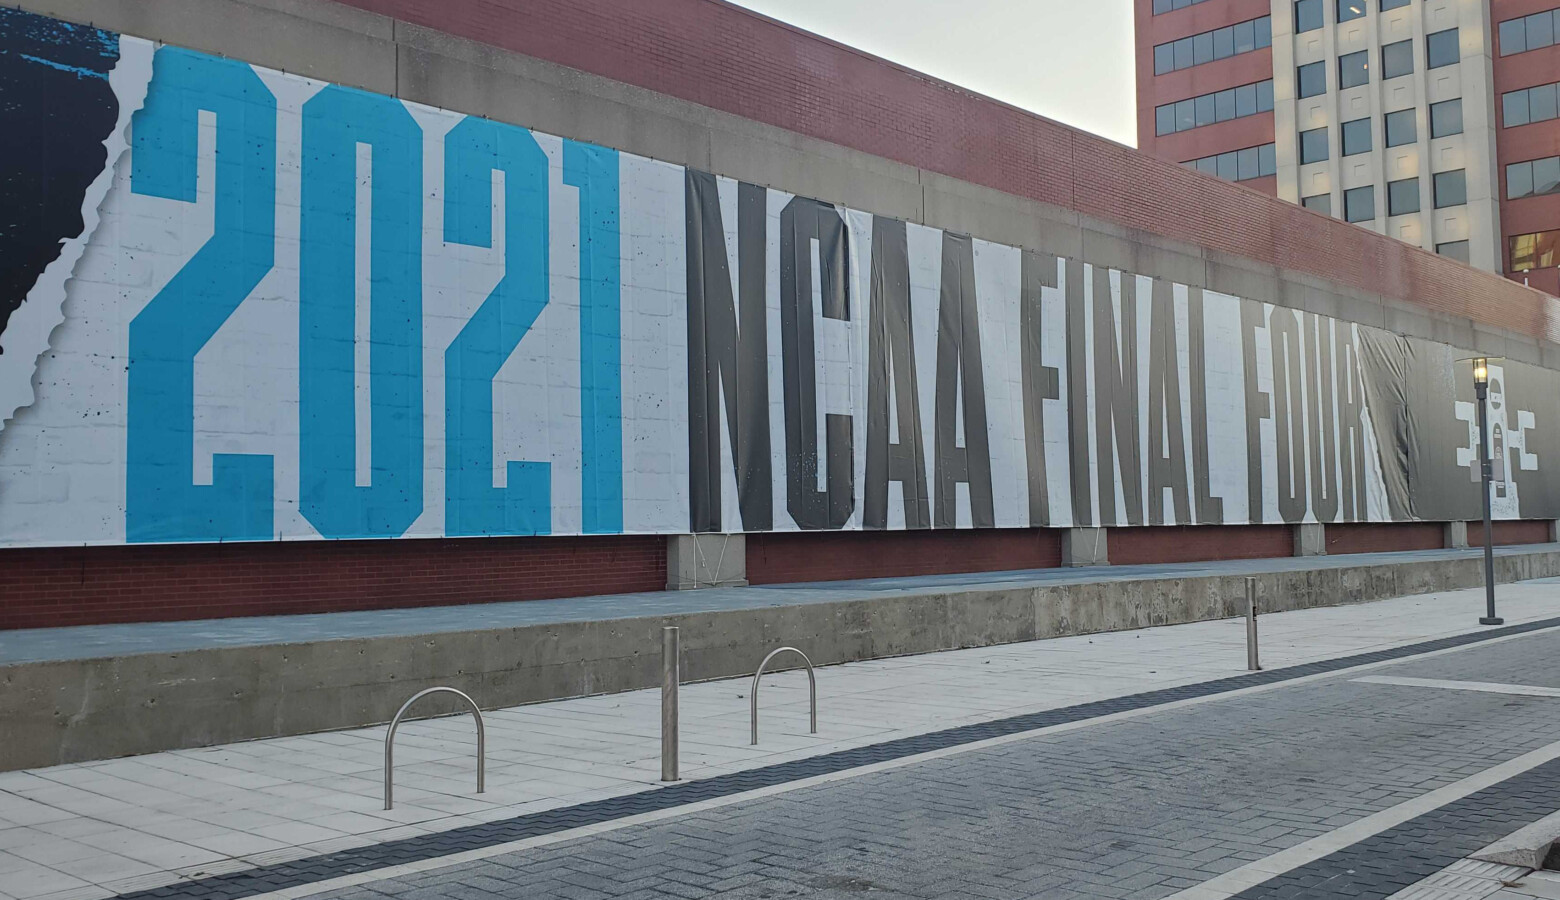 Signage for March Madness along Georgia Street ahead of the tournament. (Samantha Horton/IPB News)